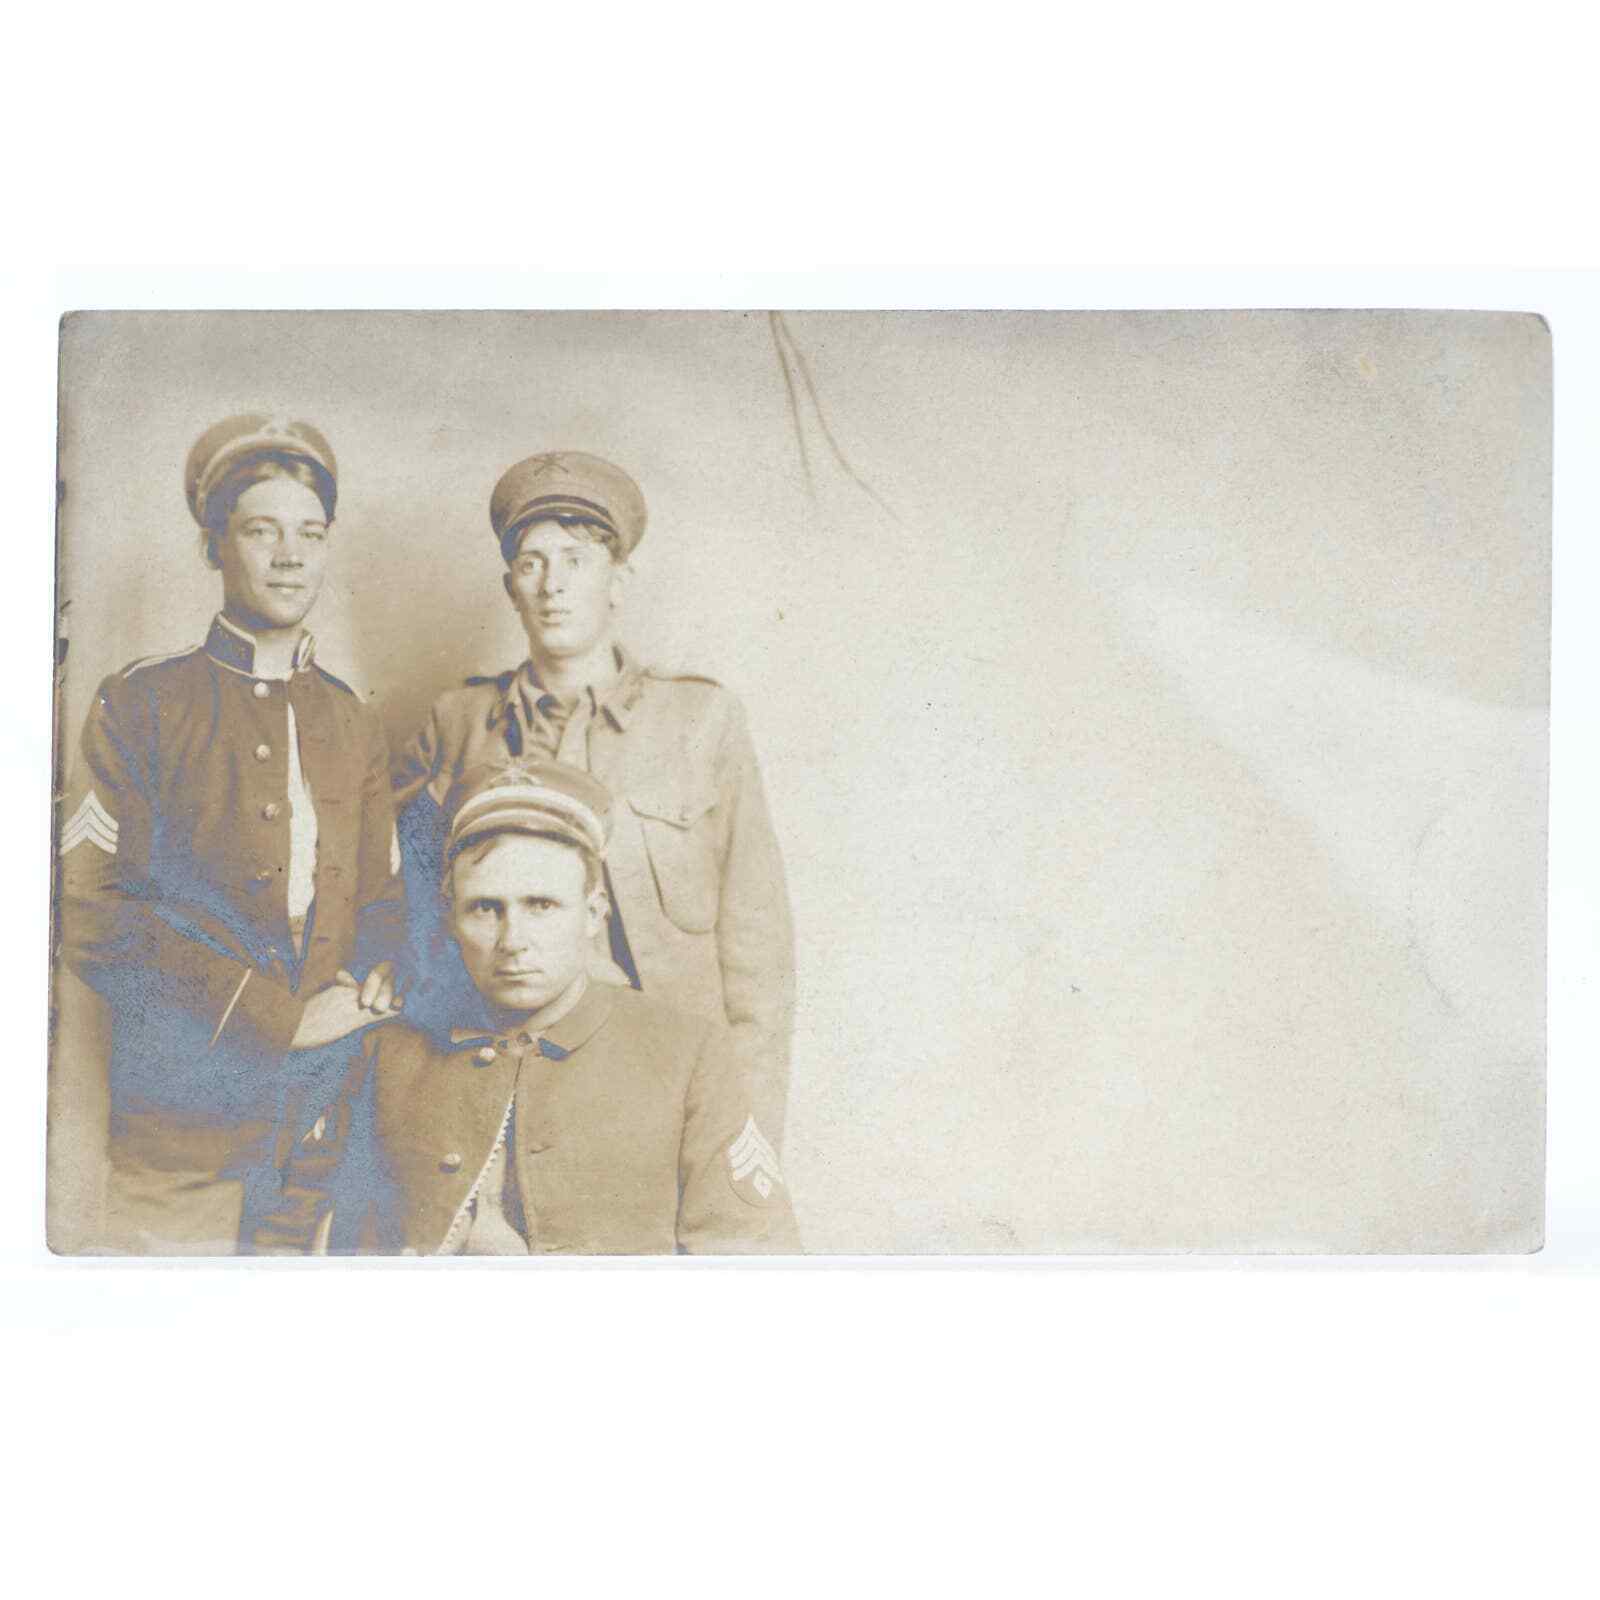 Infantry Sergeant Soldiers Pre World War I Real Photo Postcard RPPC